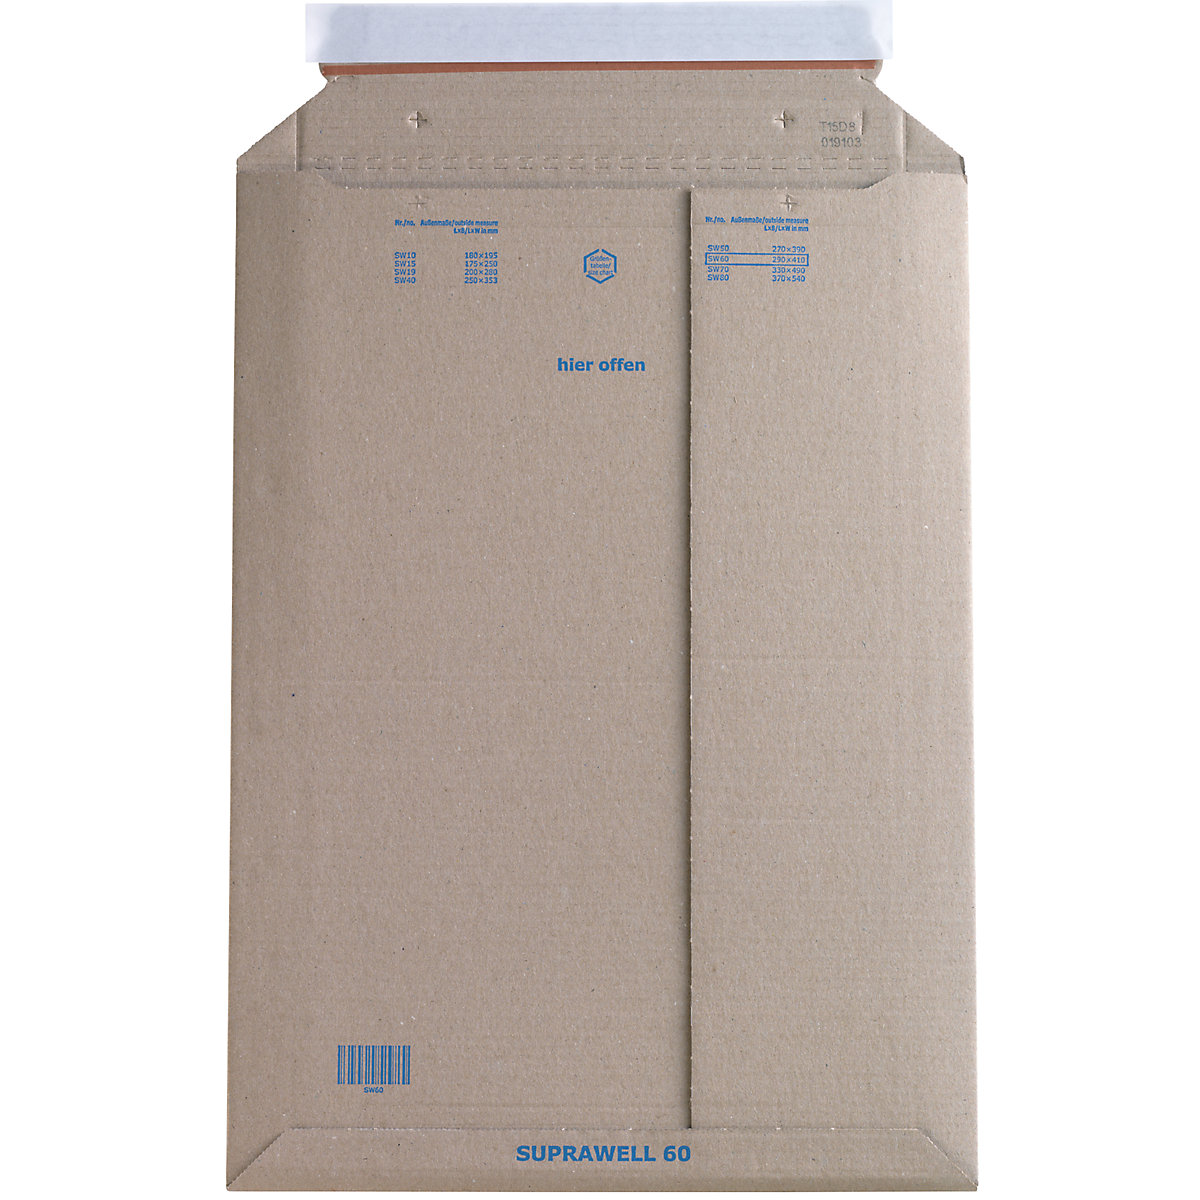 Dispatch bags, filling height up to 25 mm, LxW 410 x 290 mm-2